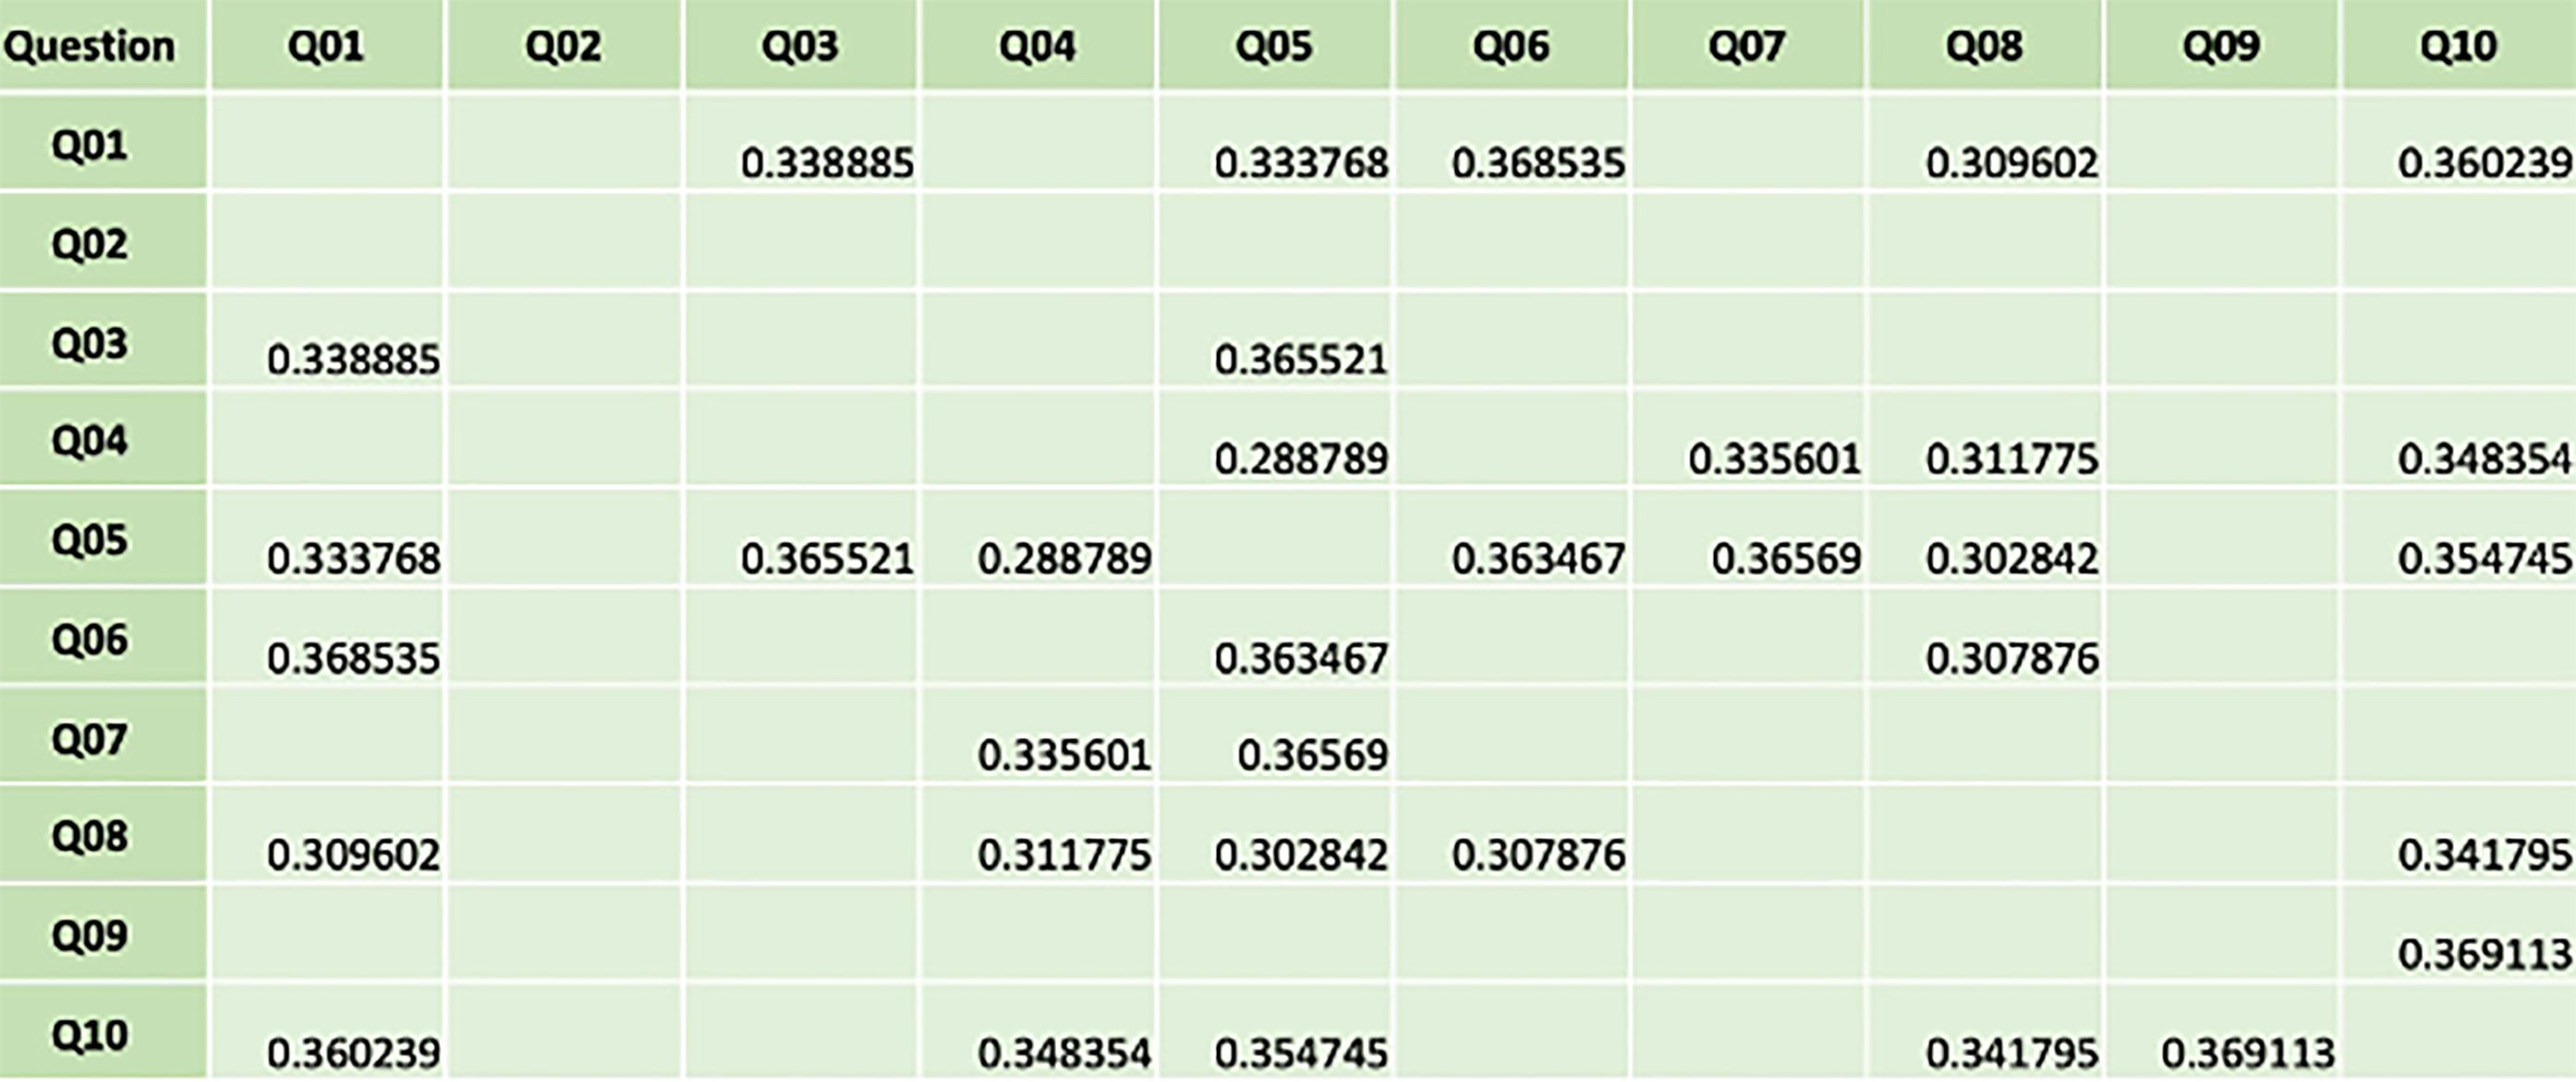 Figure 2 – Example of a Table Showing the Gini Scores for Pairs of Questions